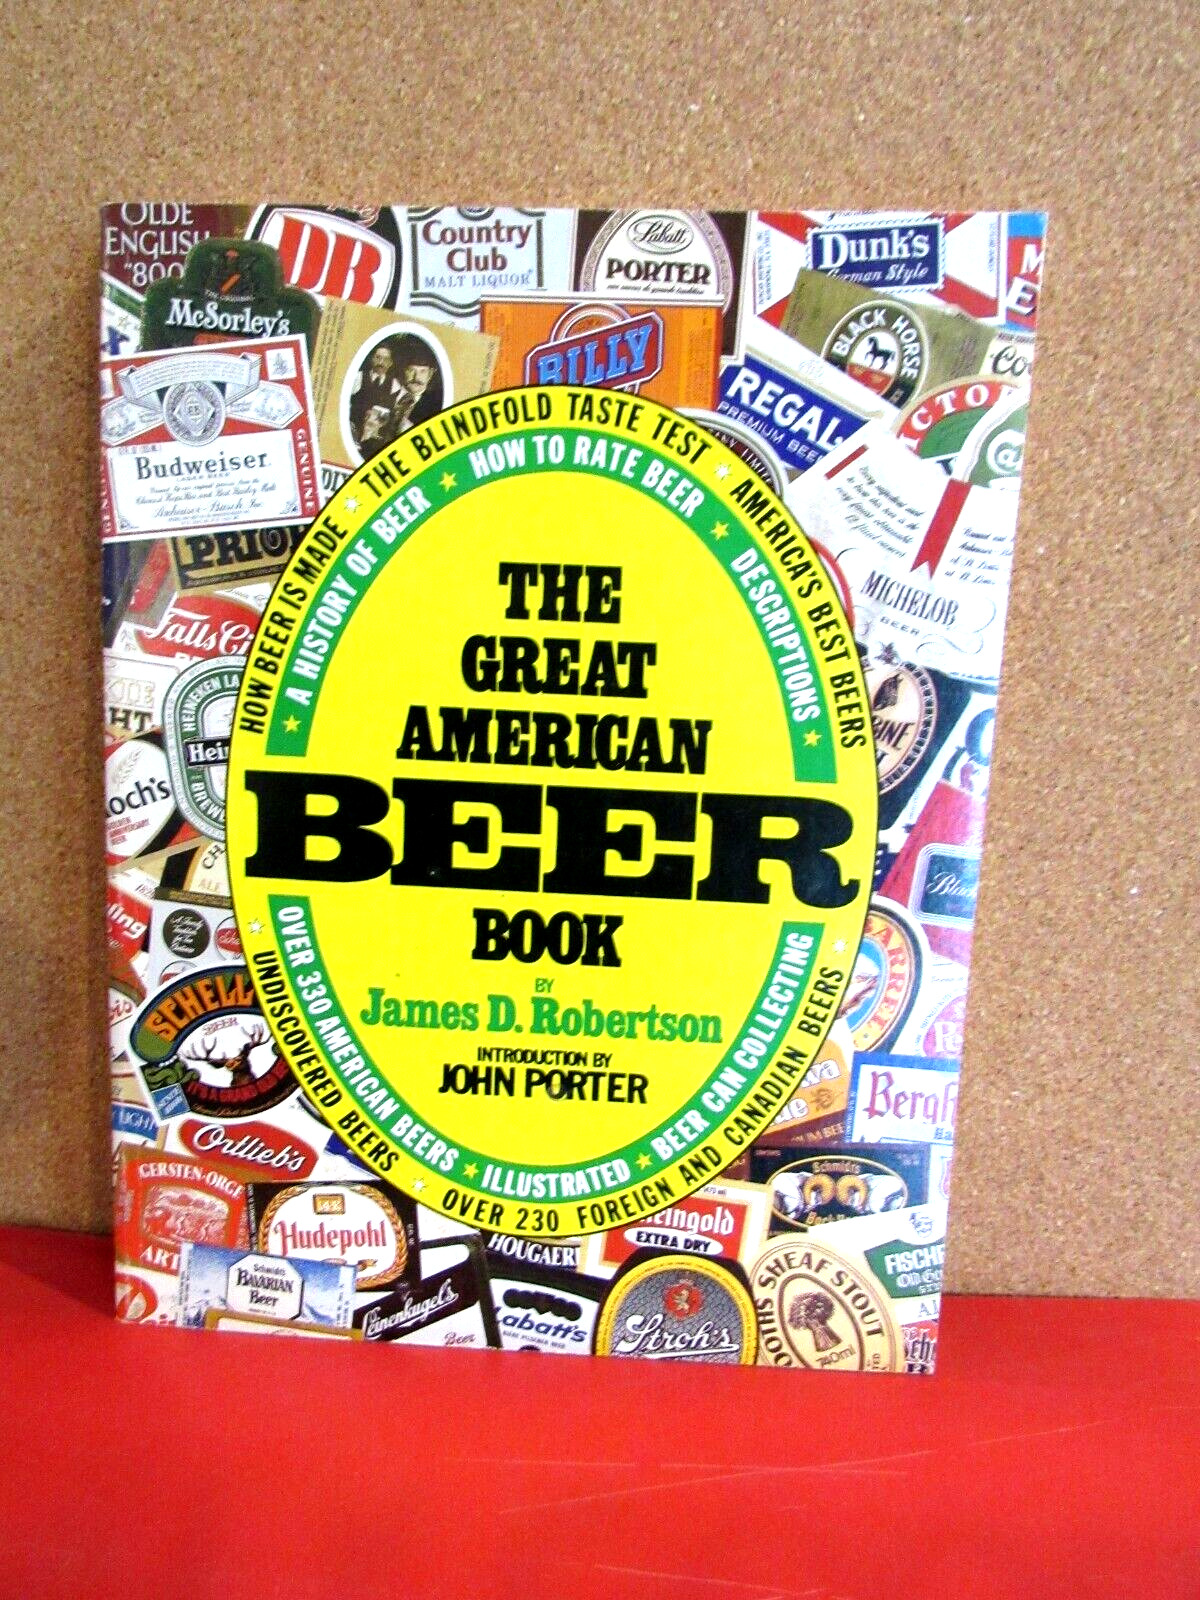 The Great American Beer Book by James D. Robertson Rare Vintage 1978 Edition